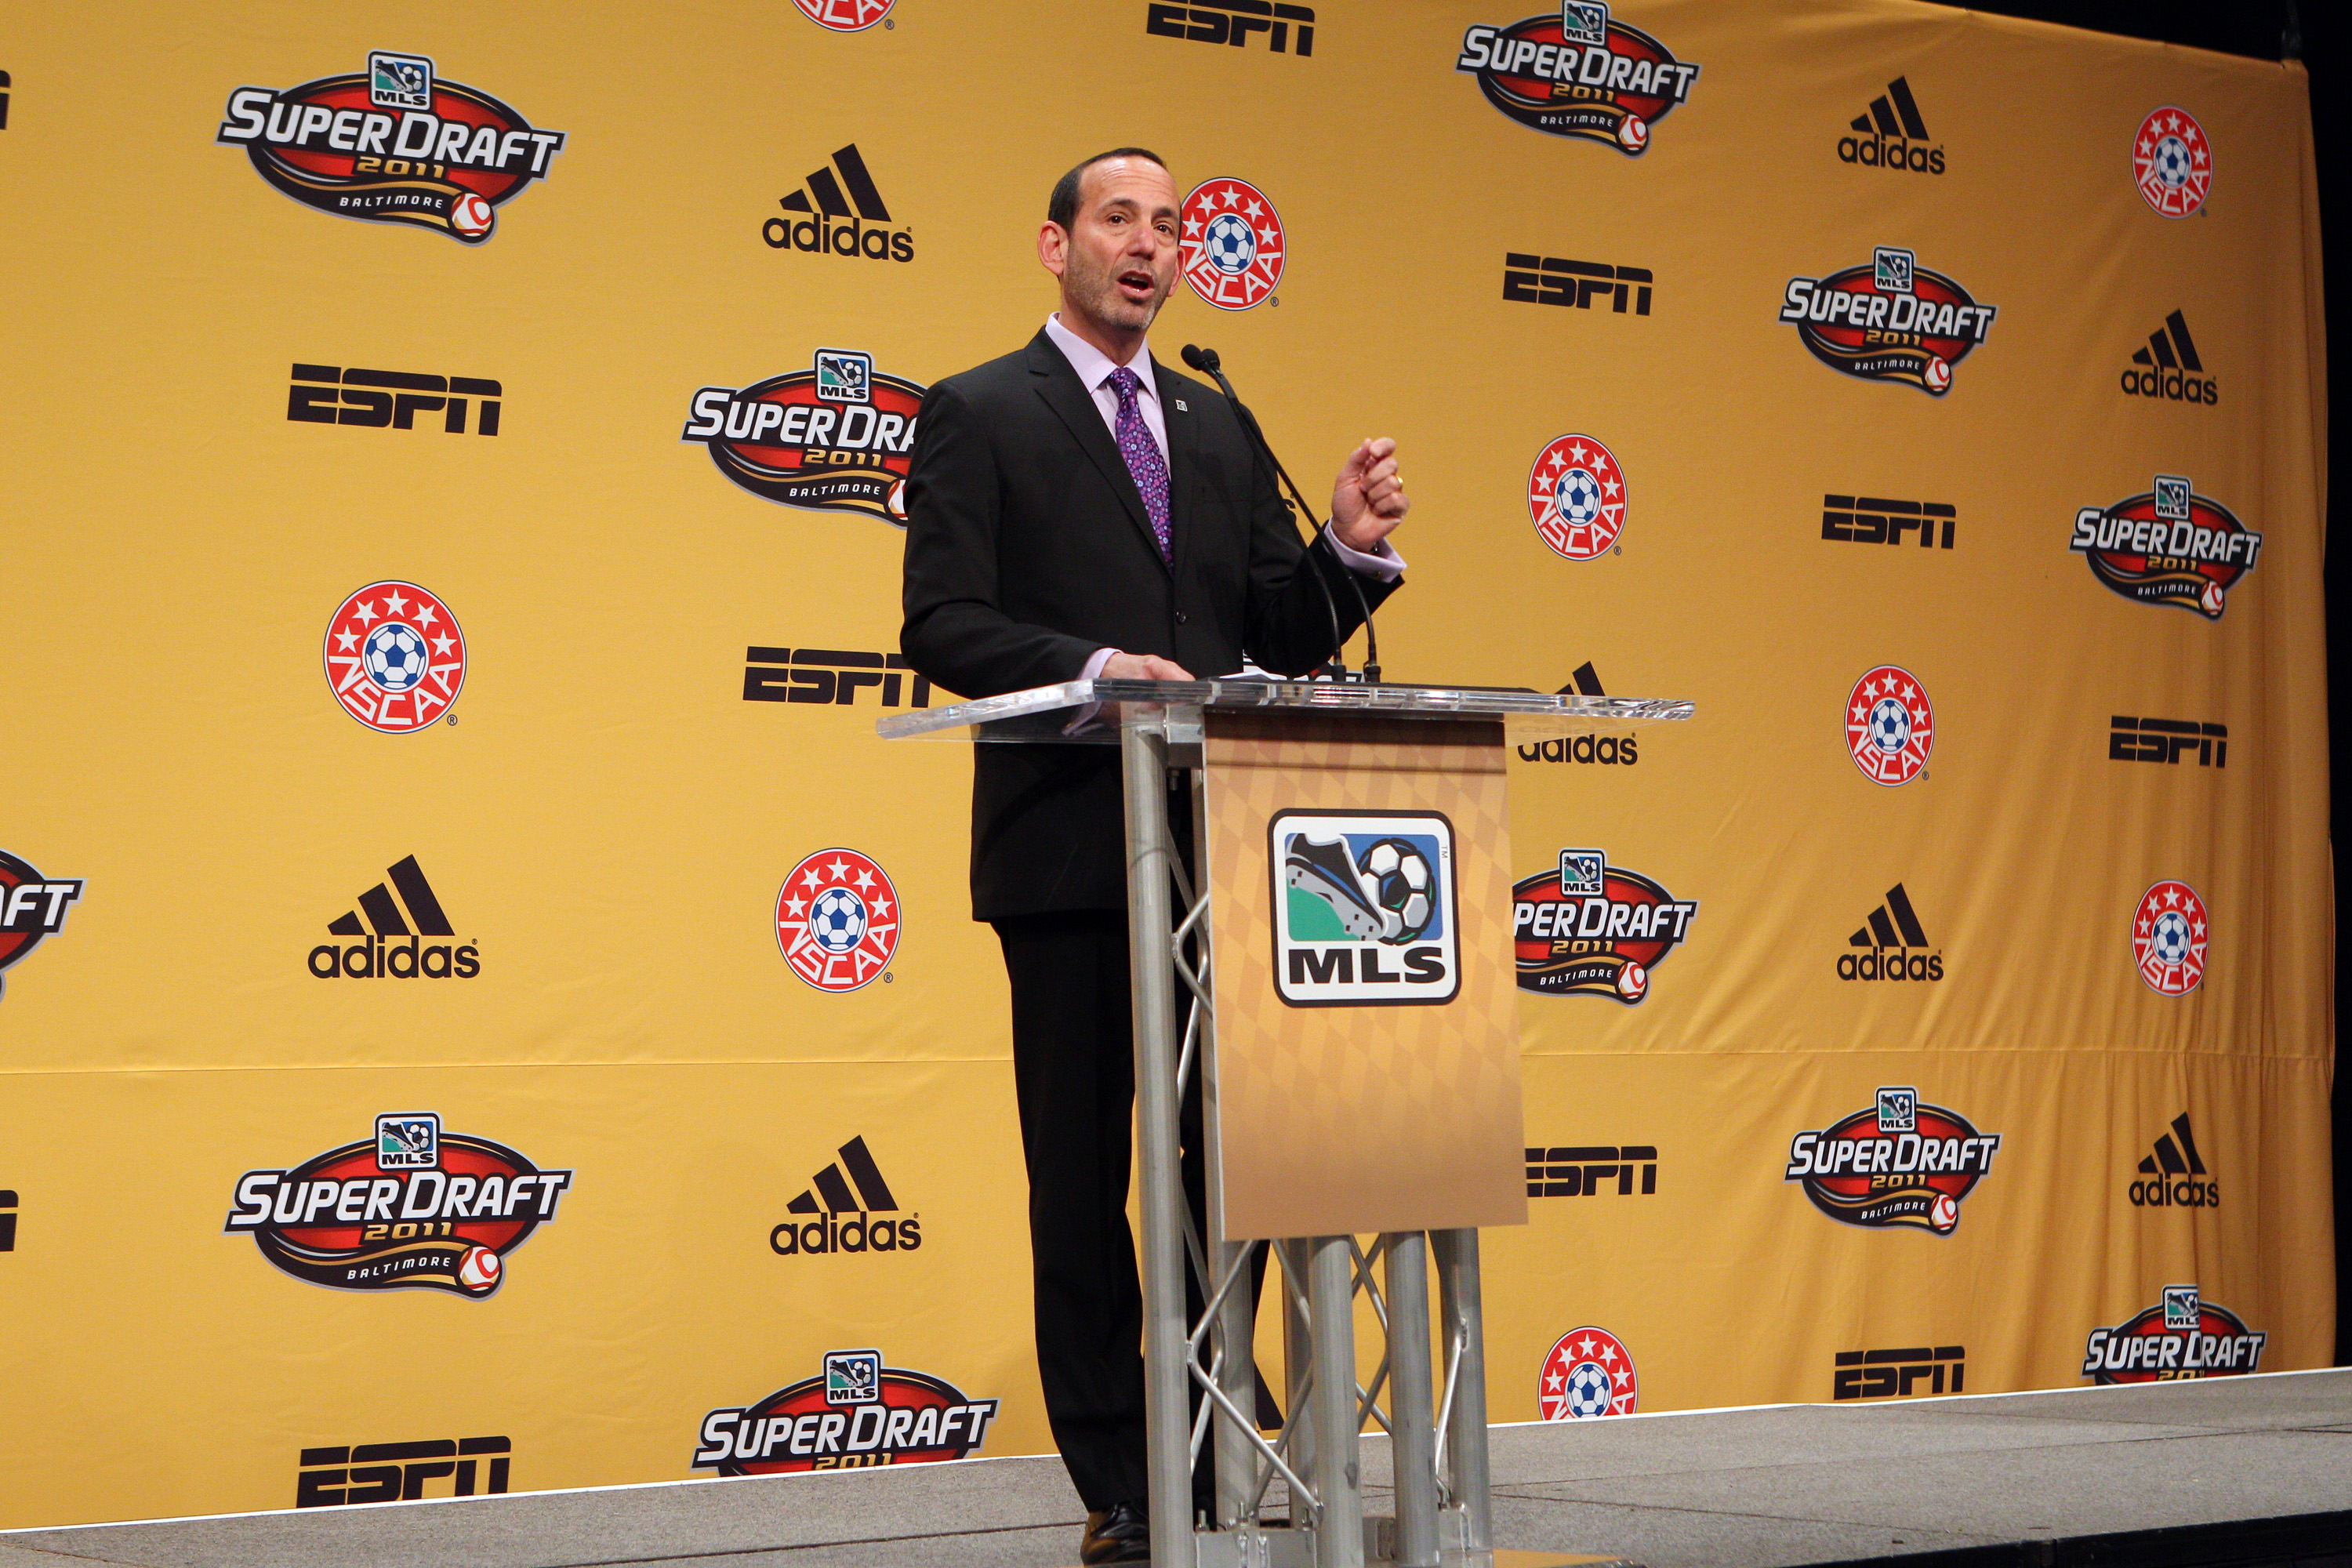 BALTIMORE, MD - JANUARY 13: MLS Commissioner Don Garber speaks from the podium during the 2011 MLS SuperDraft on January 13, 2011 at the Baltimore Convention Center in Baltimore, Maryland. (Photo by Ned Dishman/Getty Images)